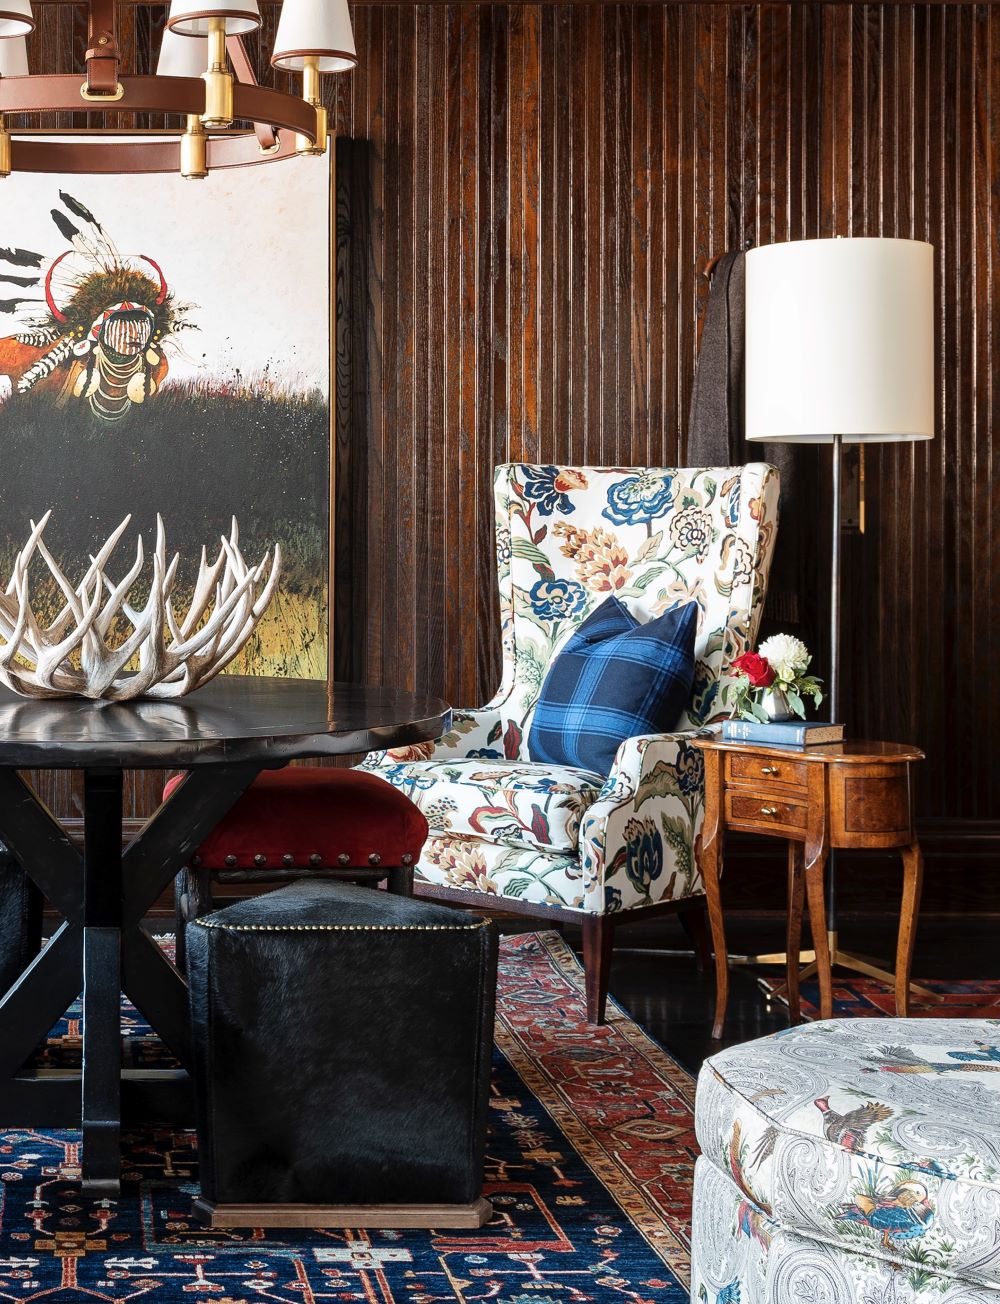 Despite historical roots, Hickory Chair’s Elliot Wing Chair boasts clean lines that Young pairs here with an up-to-the-minute bold botanical for this Western-leaning Kibler & Kirch interior.